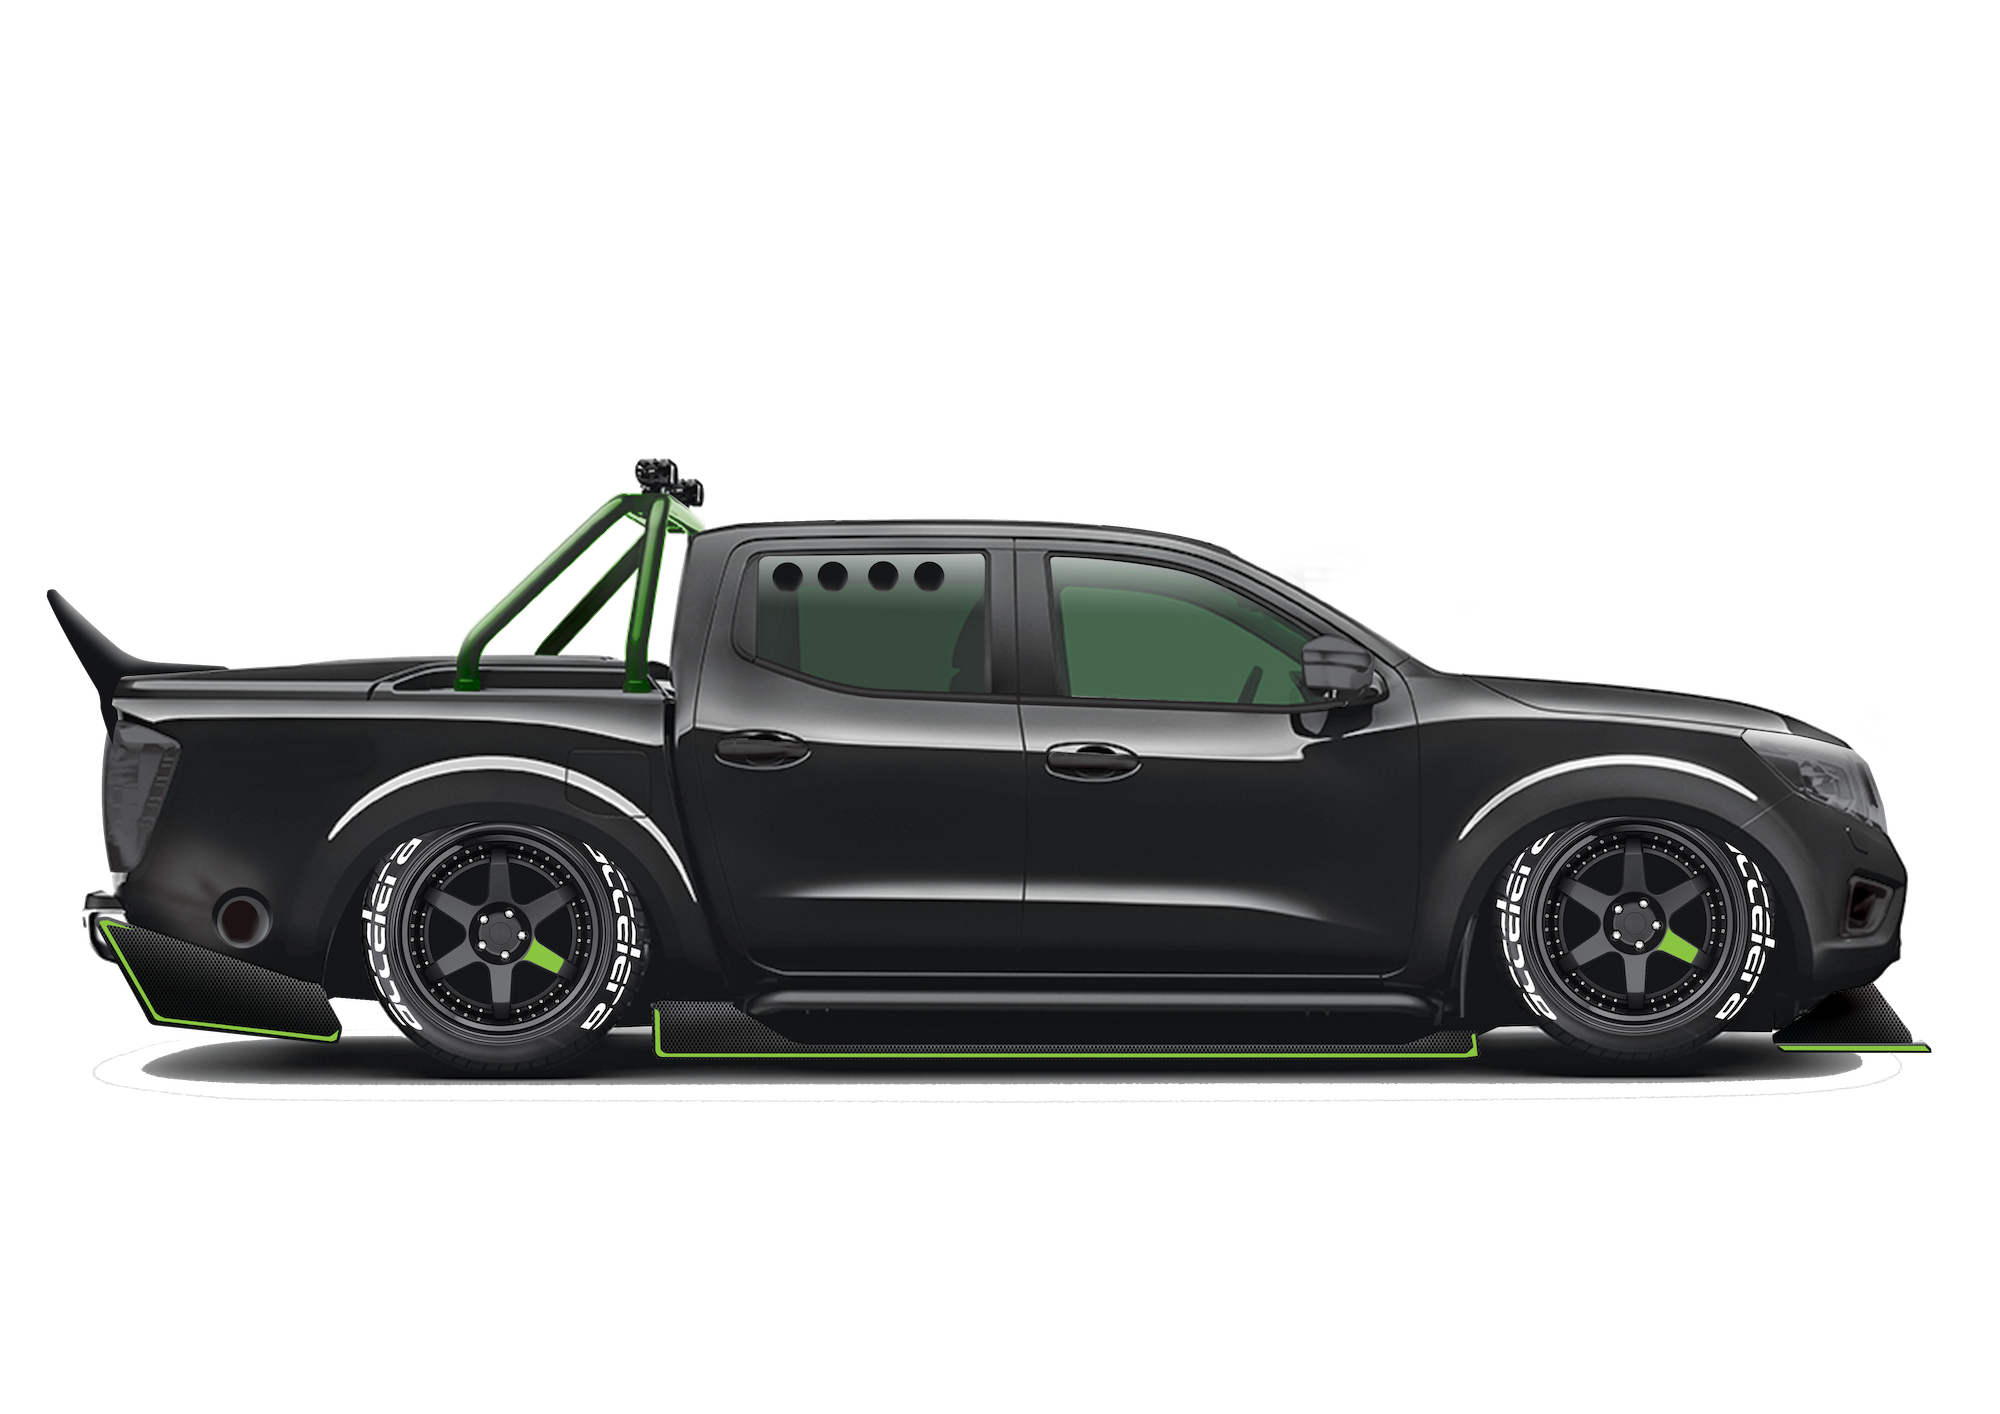 A Nissan Pickup Truck With the 1000-HP Heart of a GT-R - Navara-R